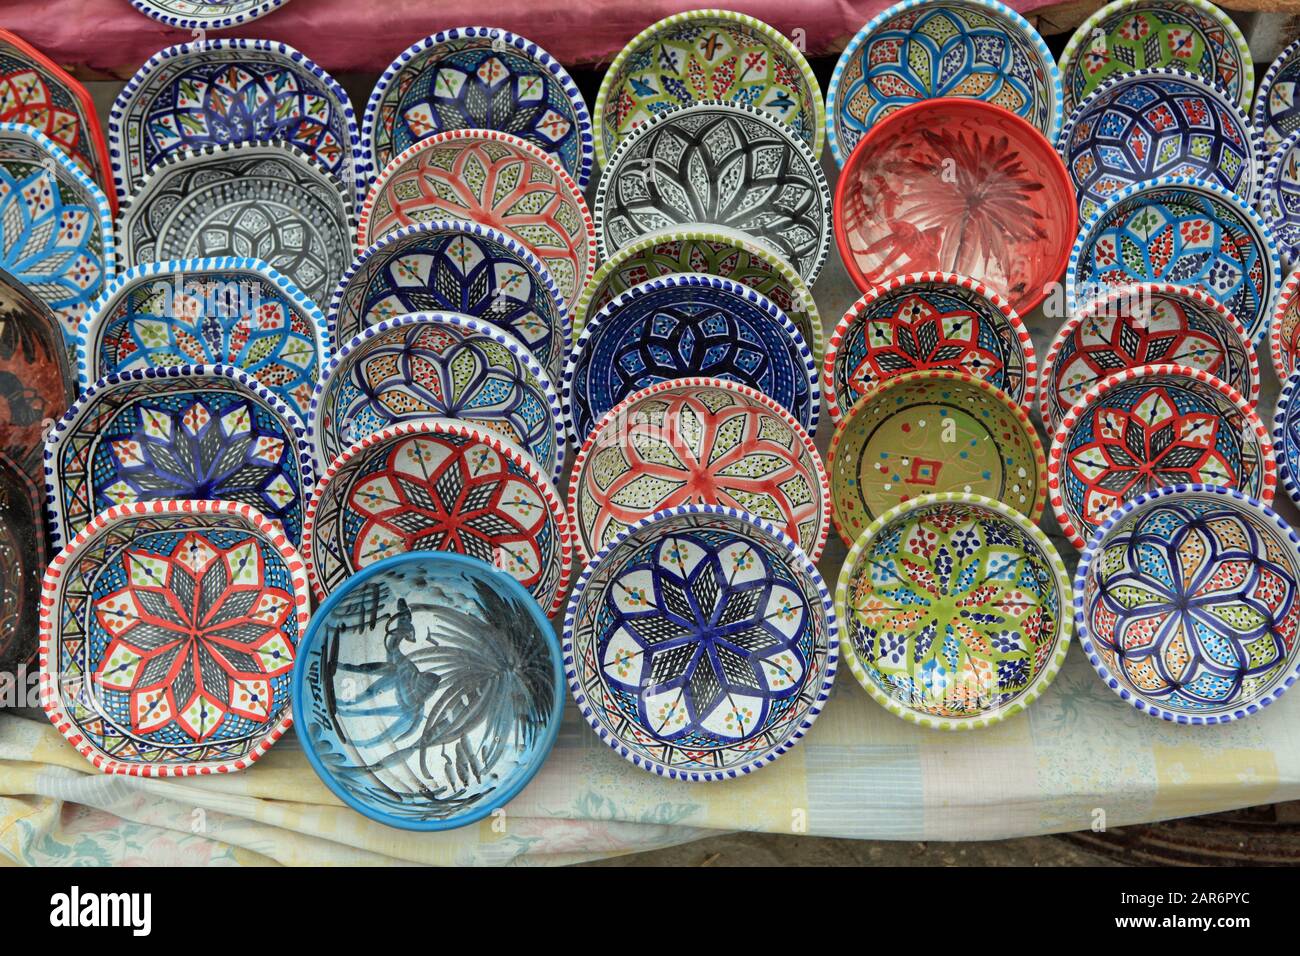 Typical Tunisian colorful decorated clay bowls for sale Stock Photo